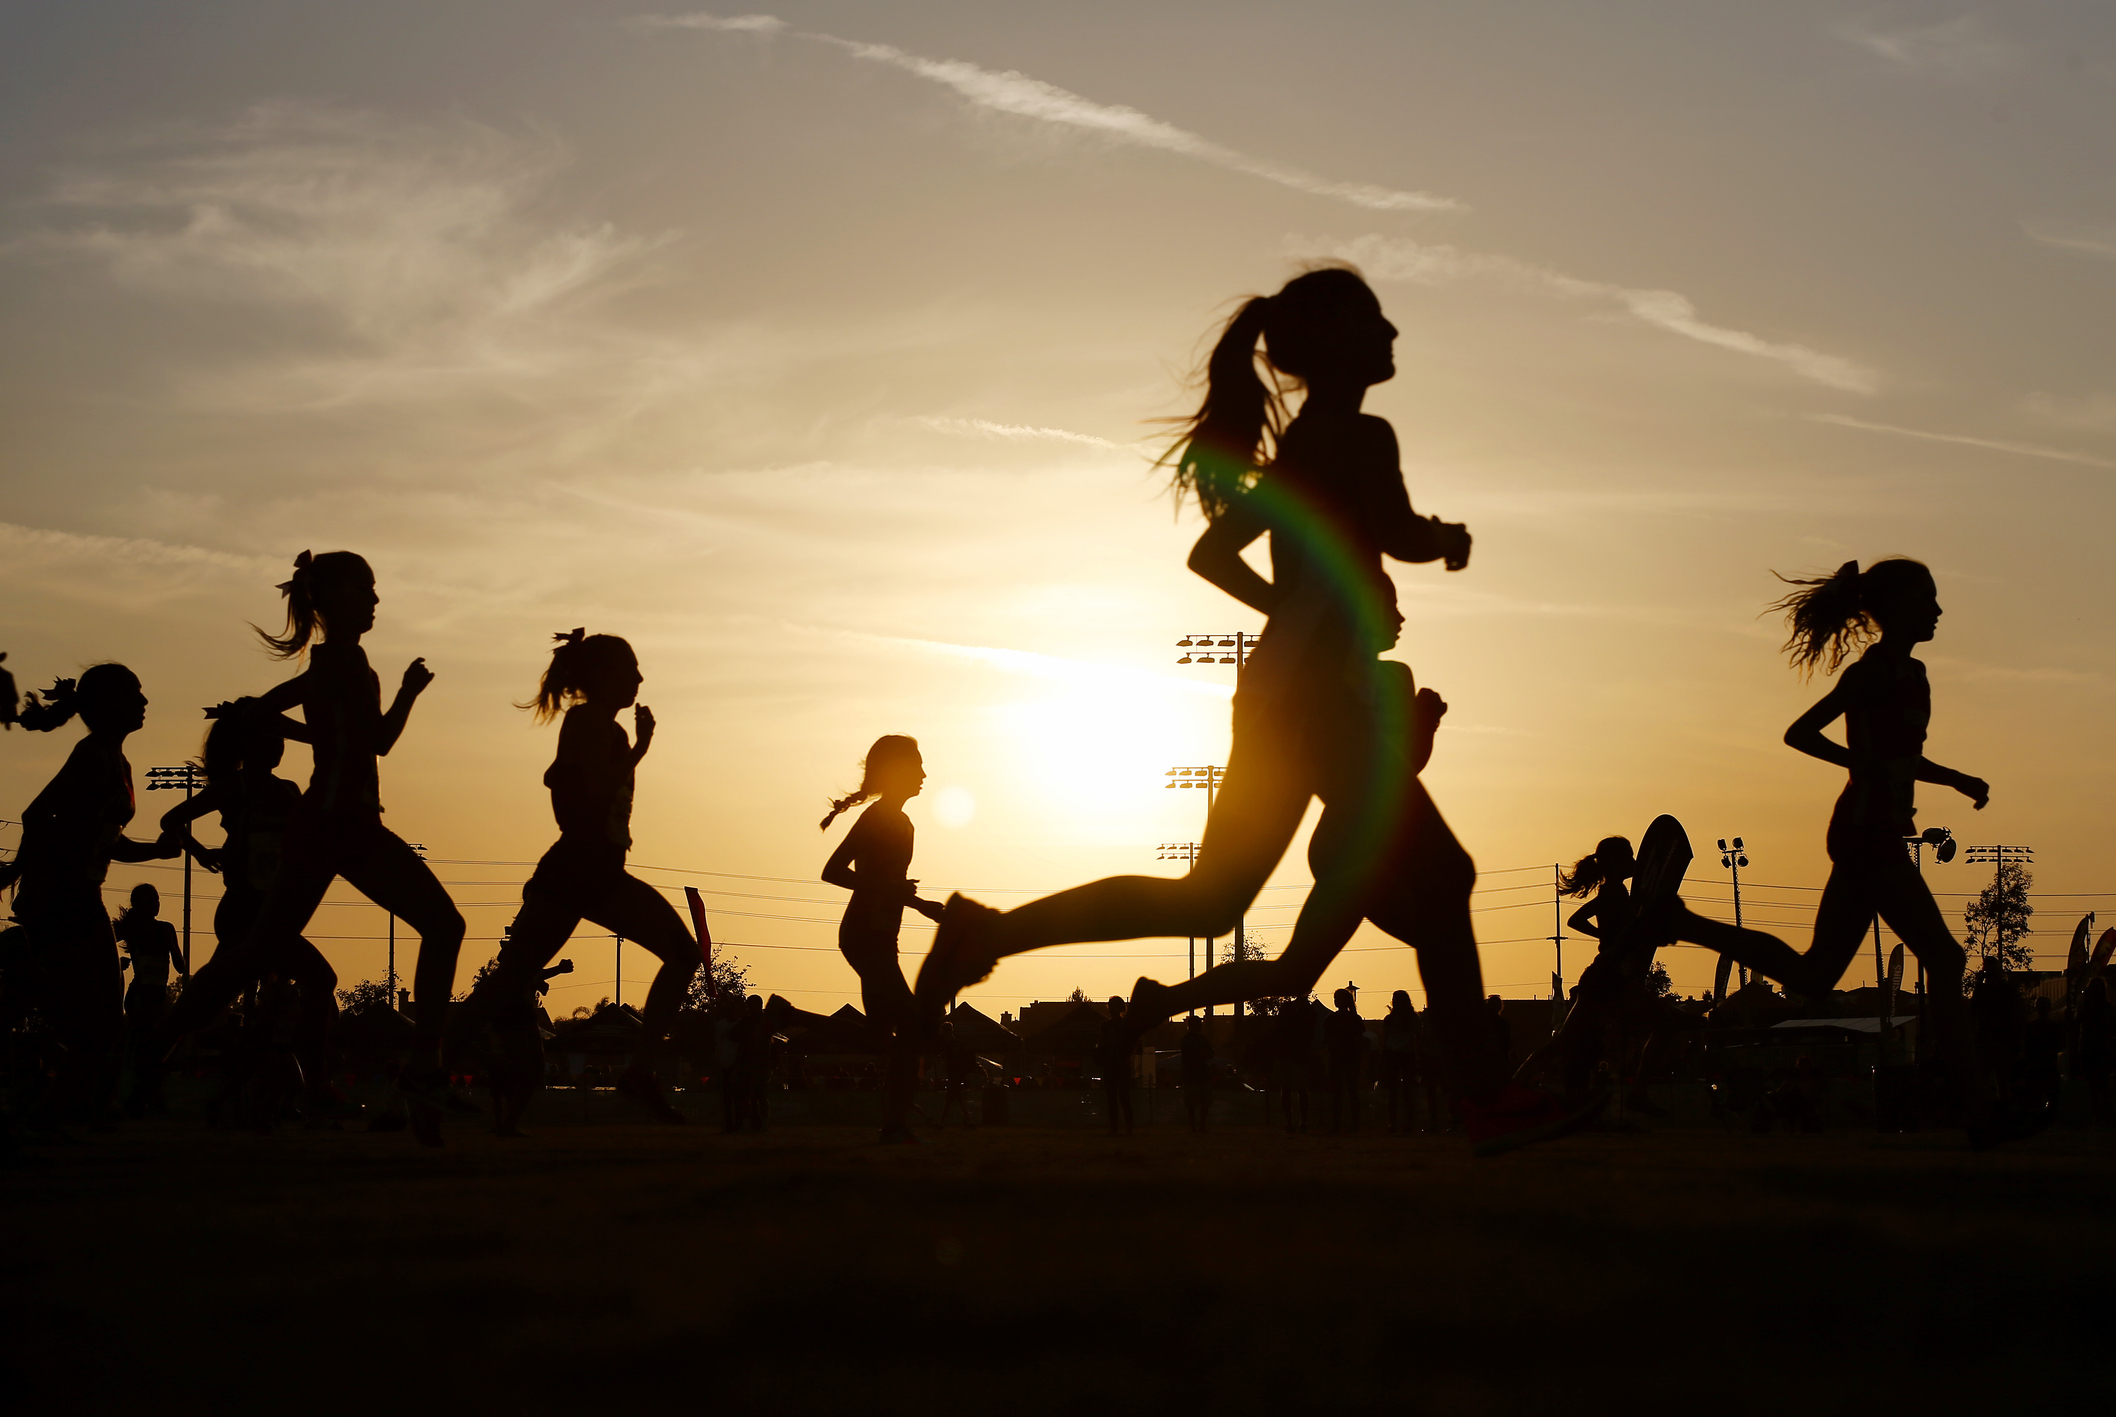 Runners compete in a 5k at sunset in Corona, California. (Getty Images)